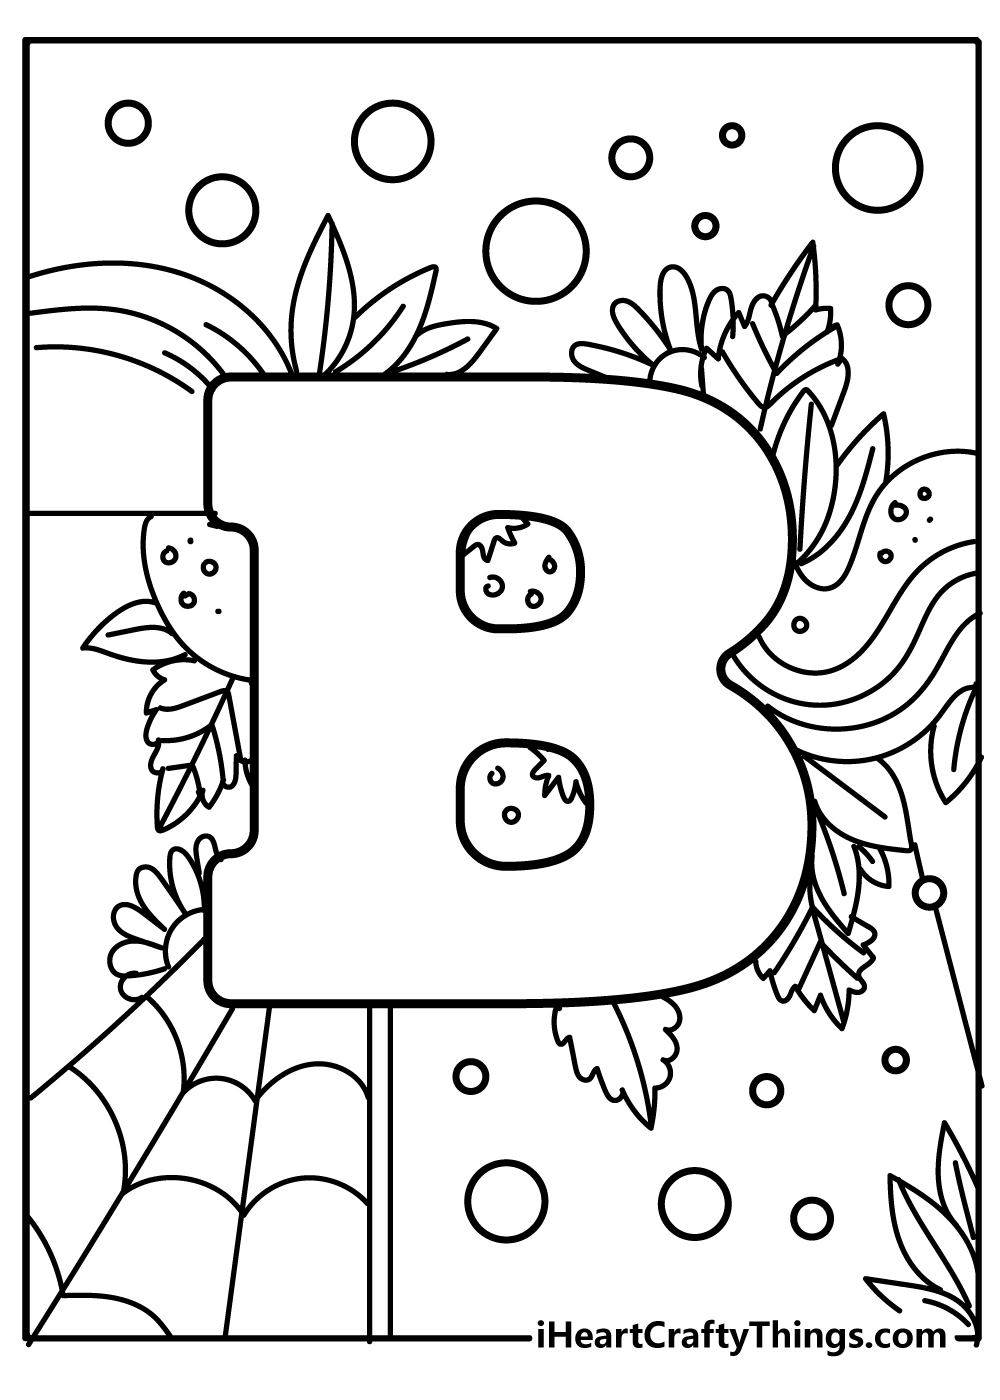 Letter B Coloring Book for kids free printable